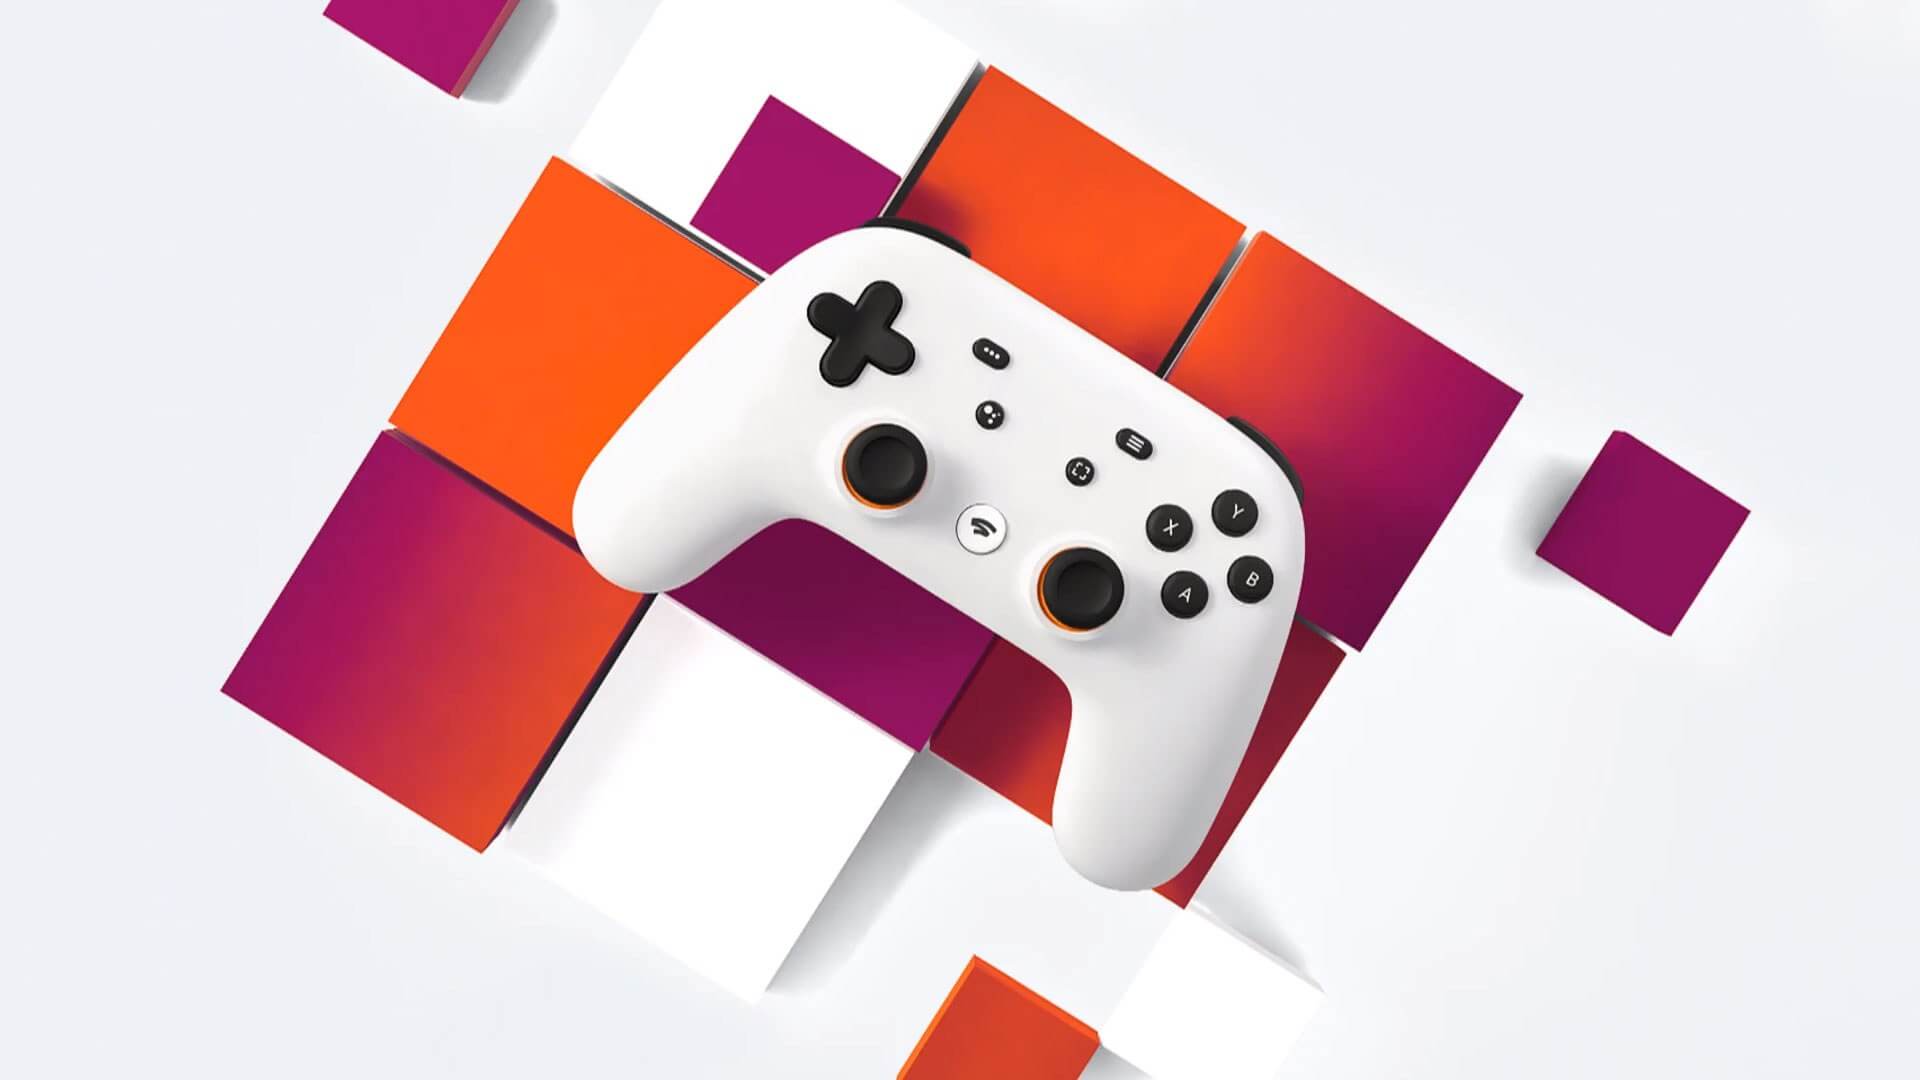 Stadia Premiere Edition is discounted to $99 until midnight March 20